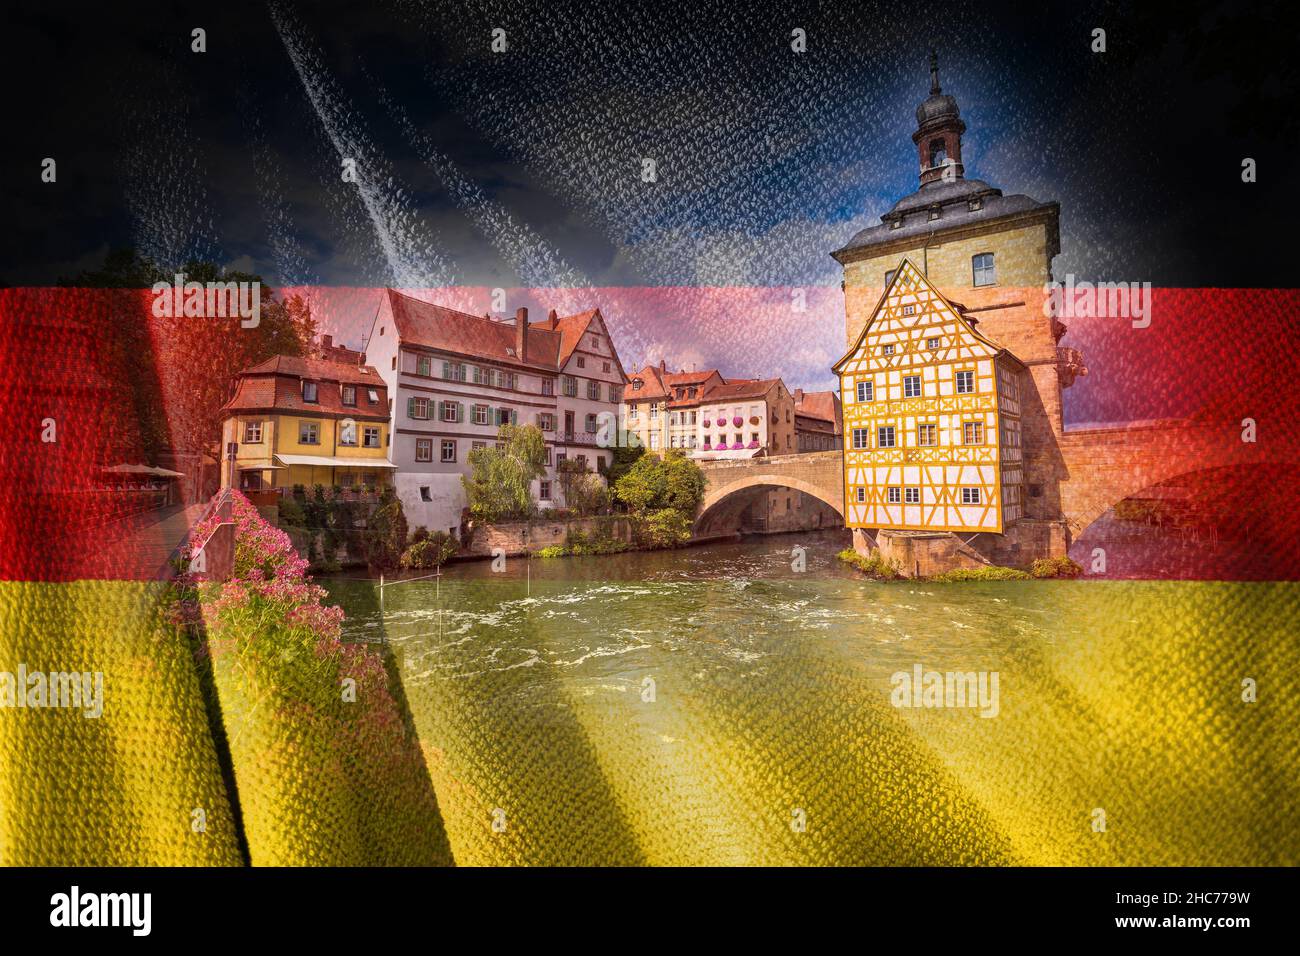 Bamberg. Scenic view of Old Town Hall of Bambergwith two bridges over the Regnitz river on German flag overlay, Bavaria region of Germany Stock Photo